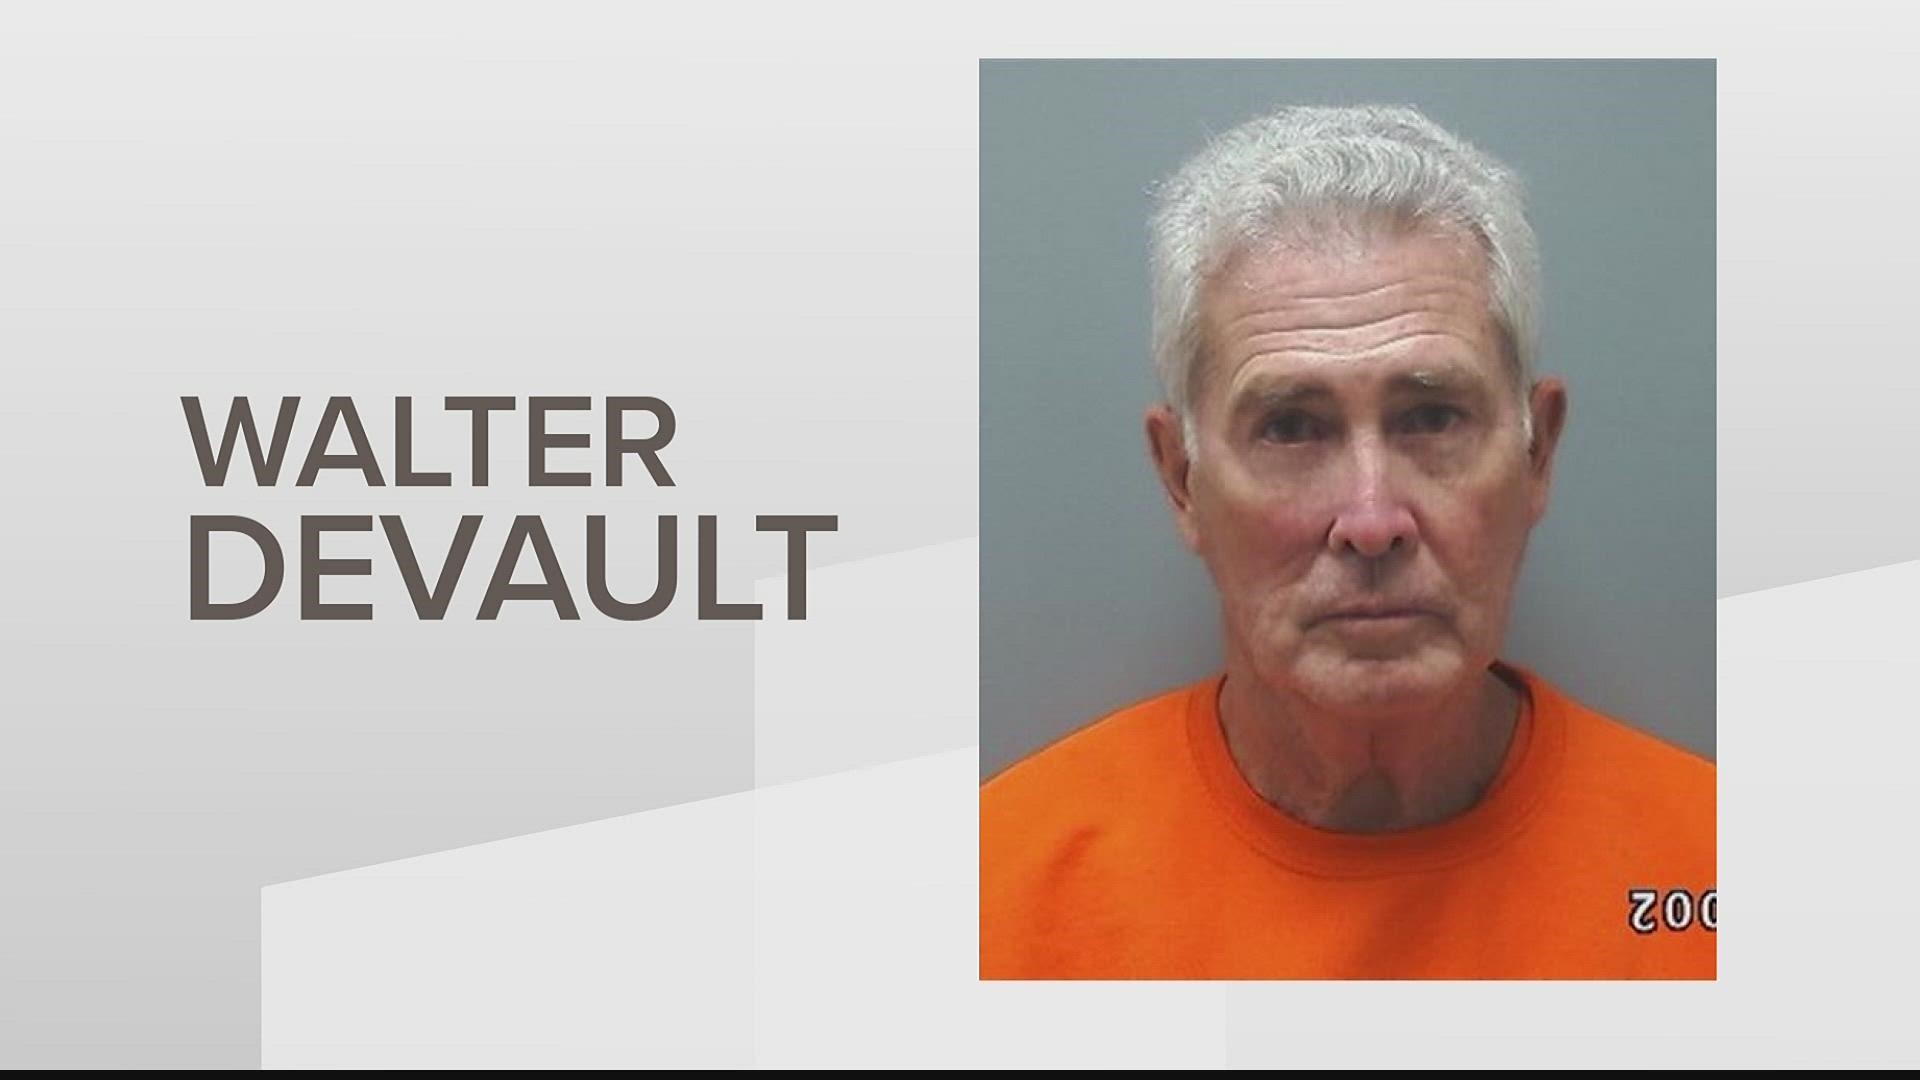 Walter Gary DeVault was convicted in February.